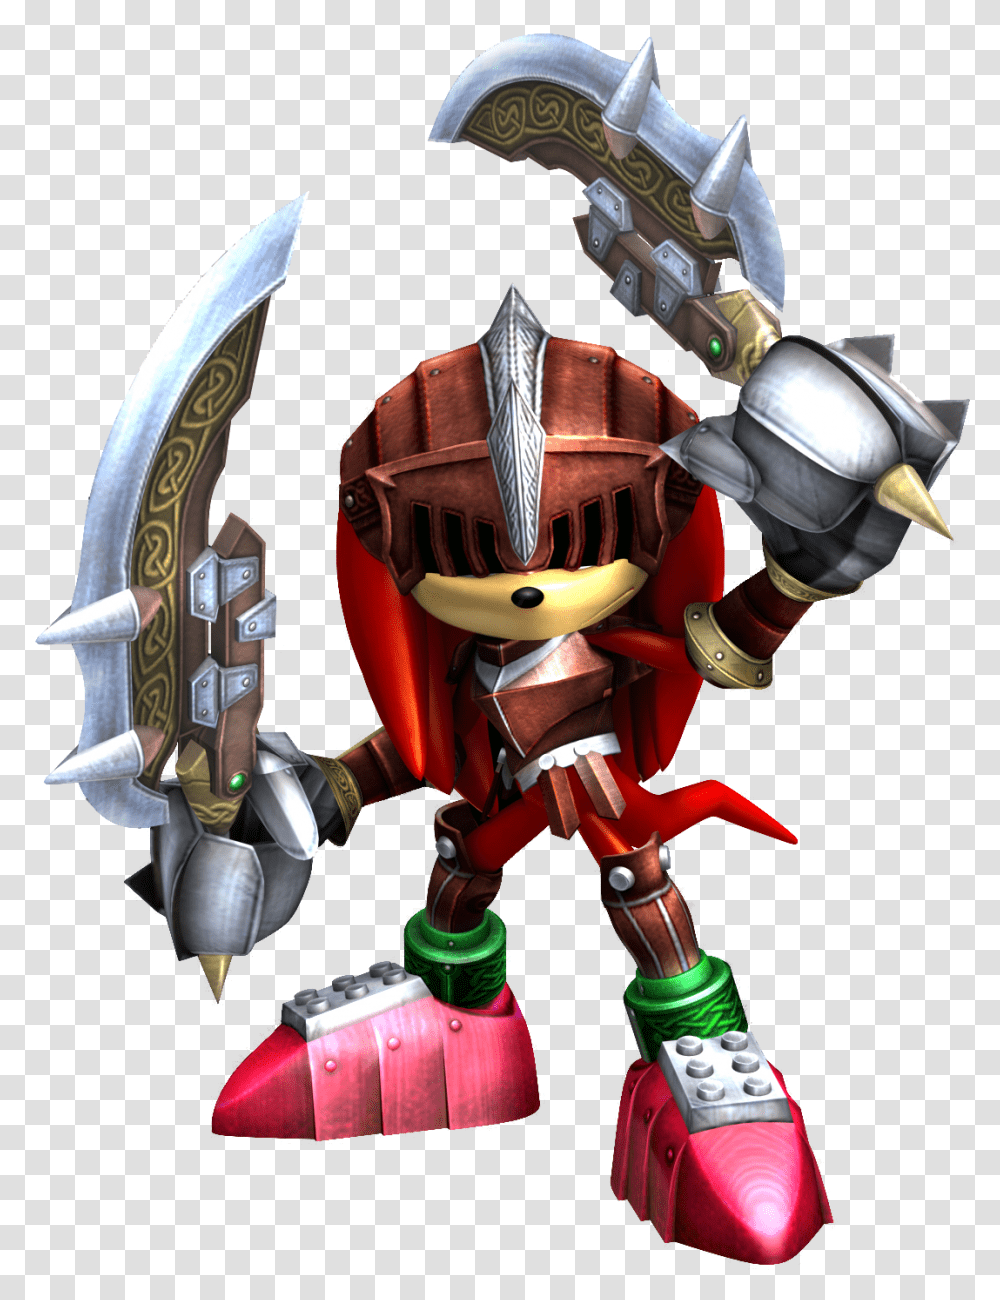 Uh Meow Sonic And The Black Knight Knuckles, Toy, Armor, Samurai, Sweets Transparent Png